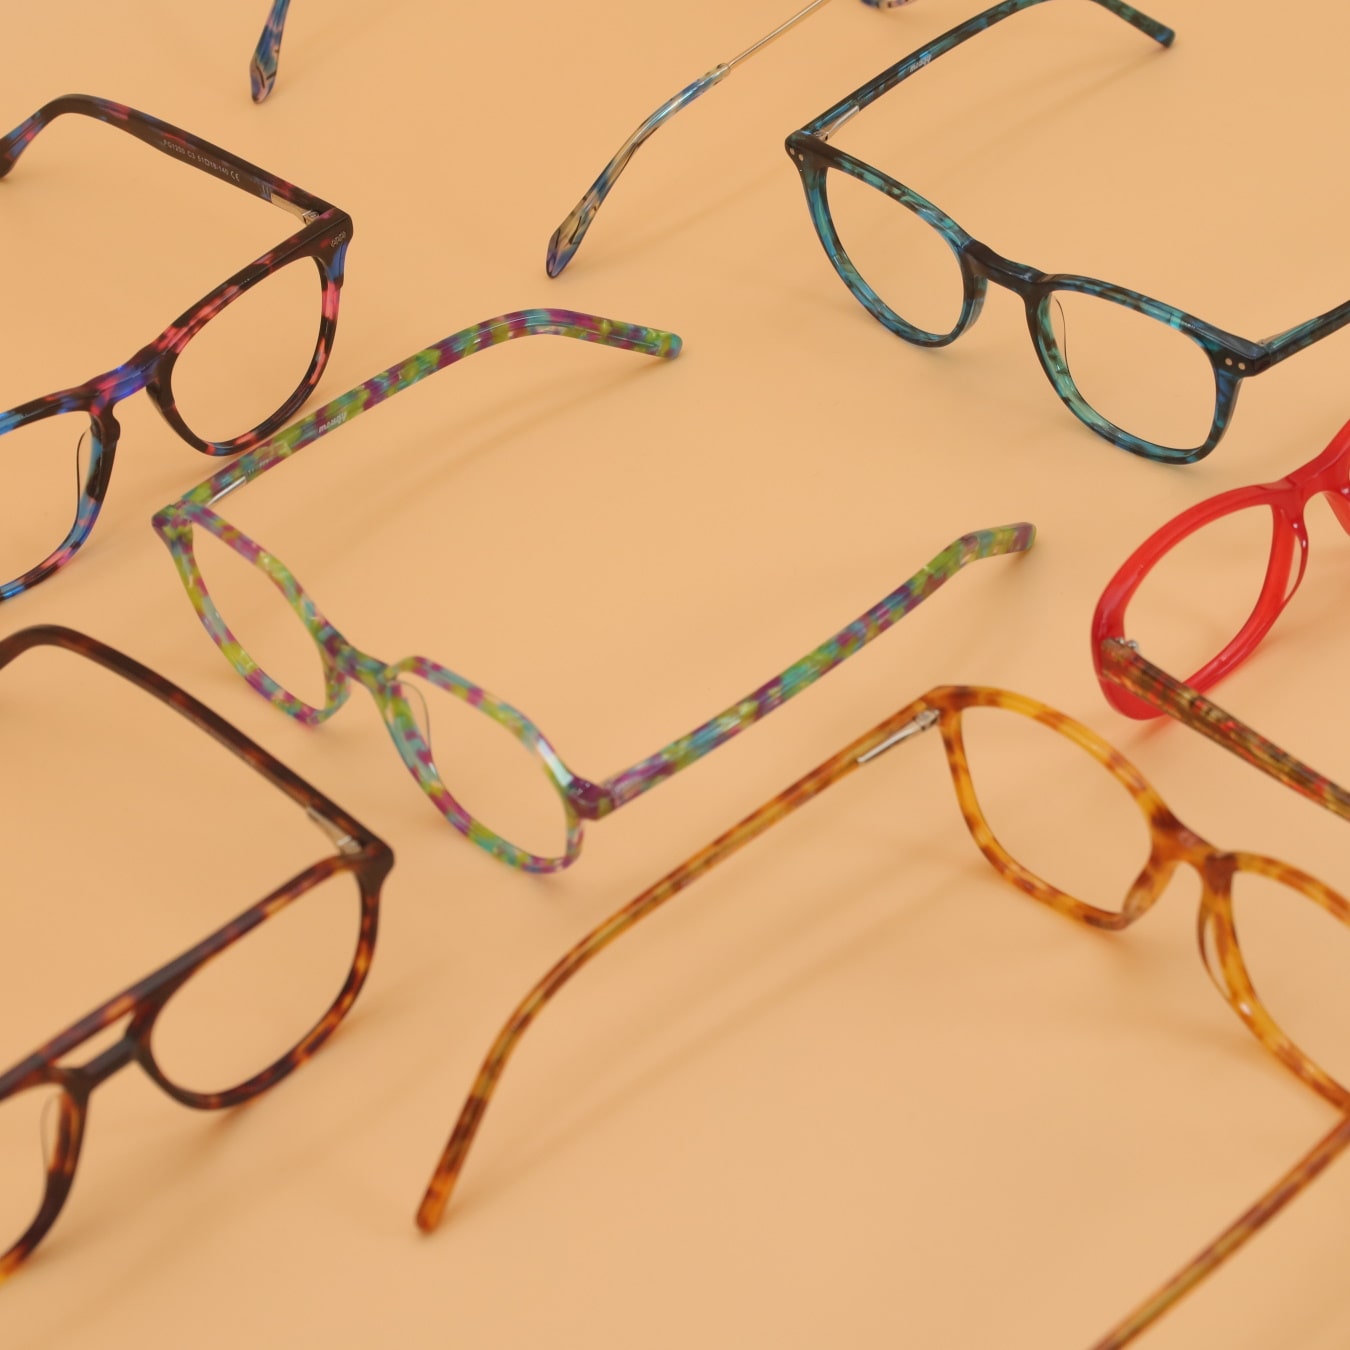 glasses frames of assorted colors